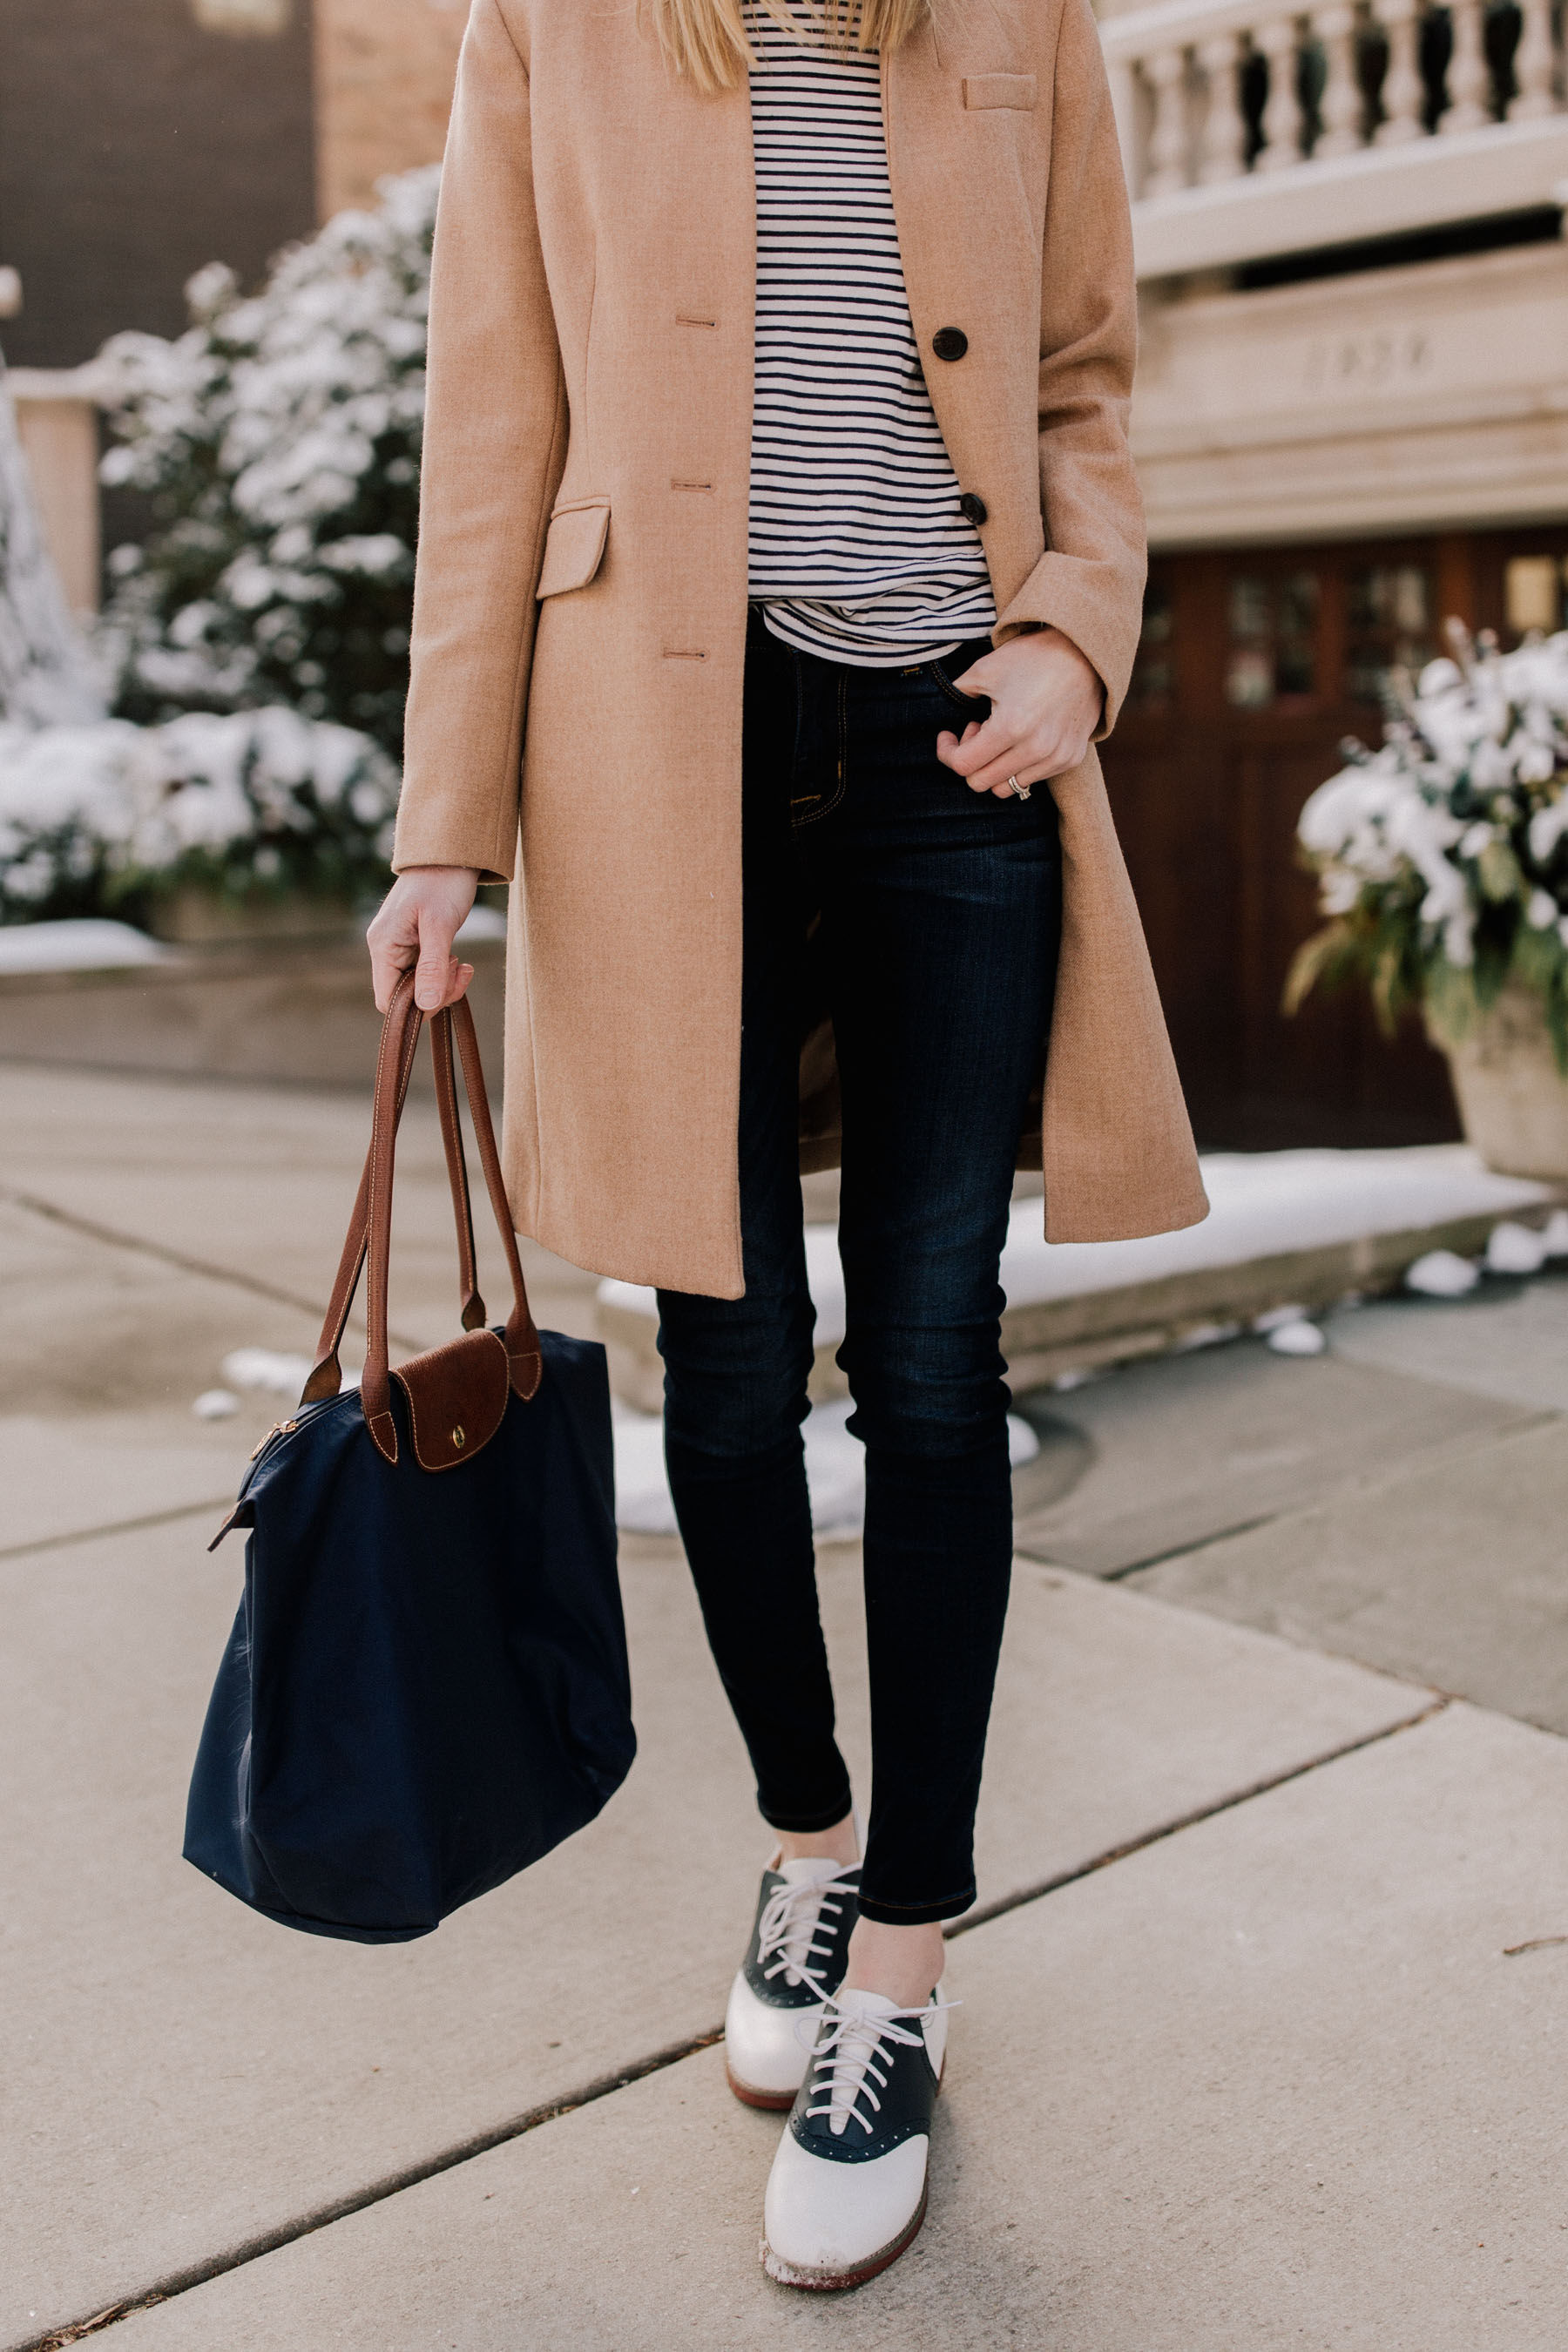 saddle shoes outfit